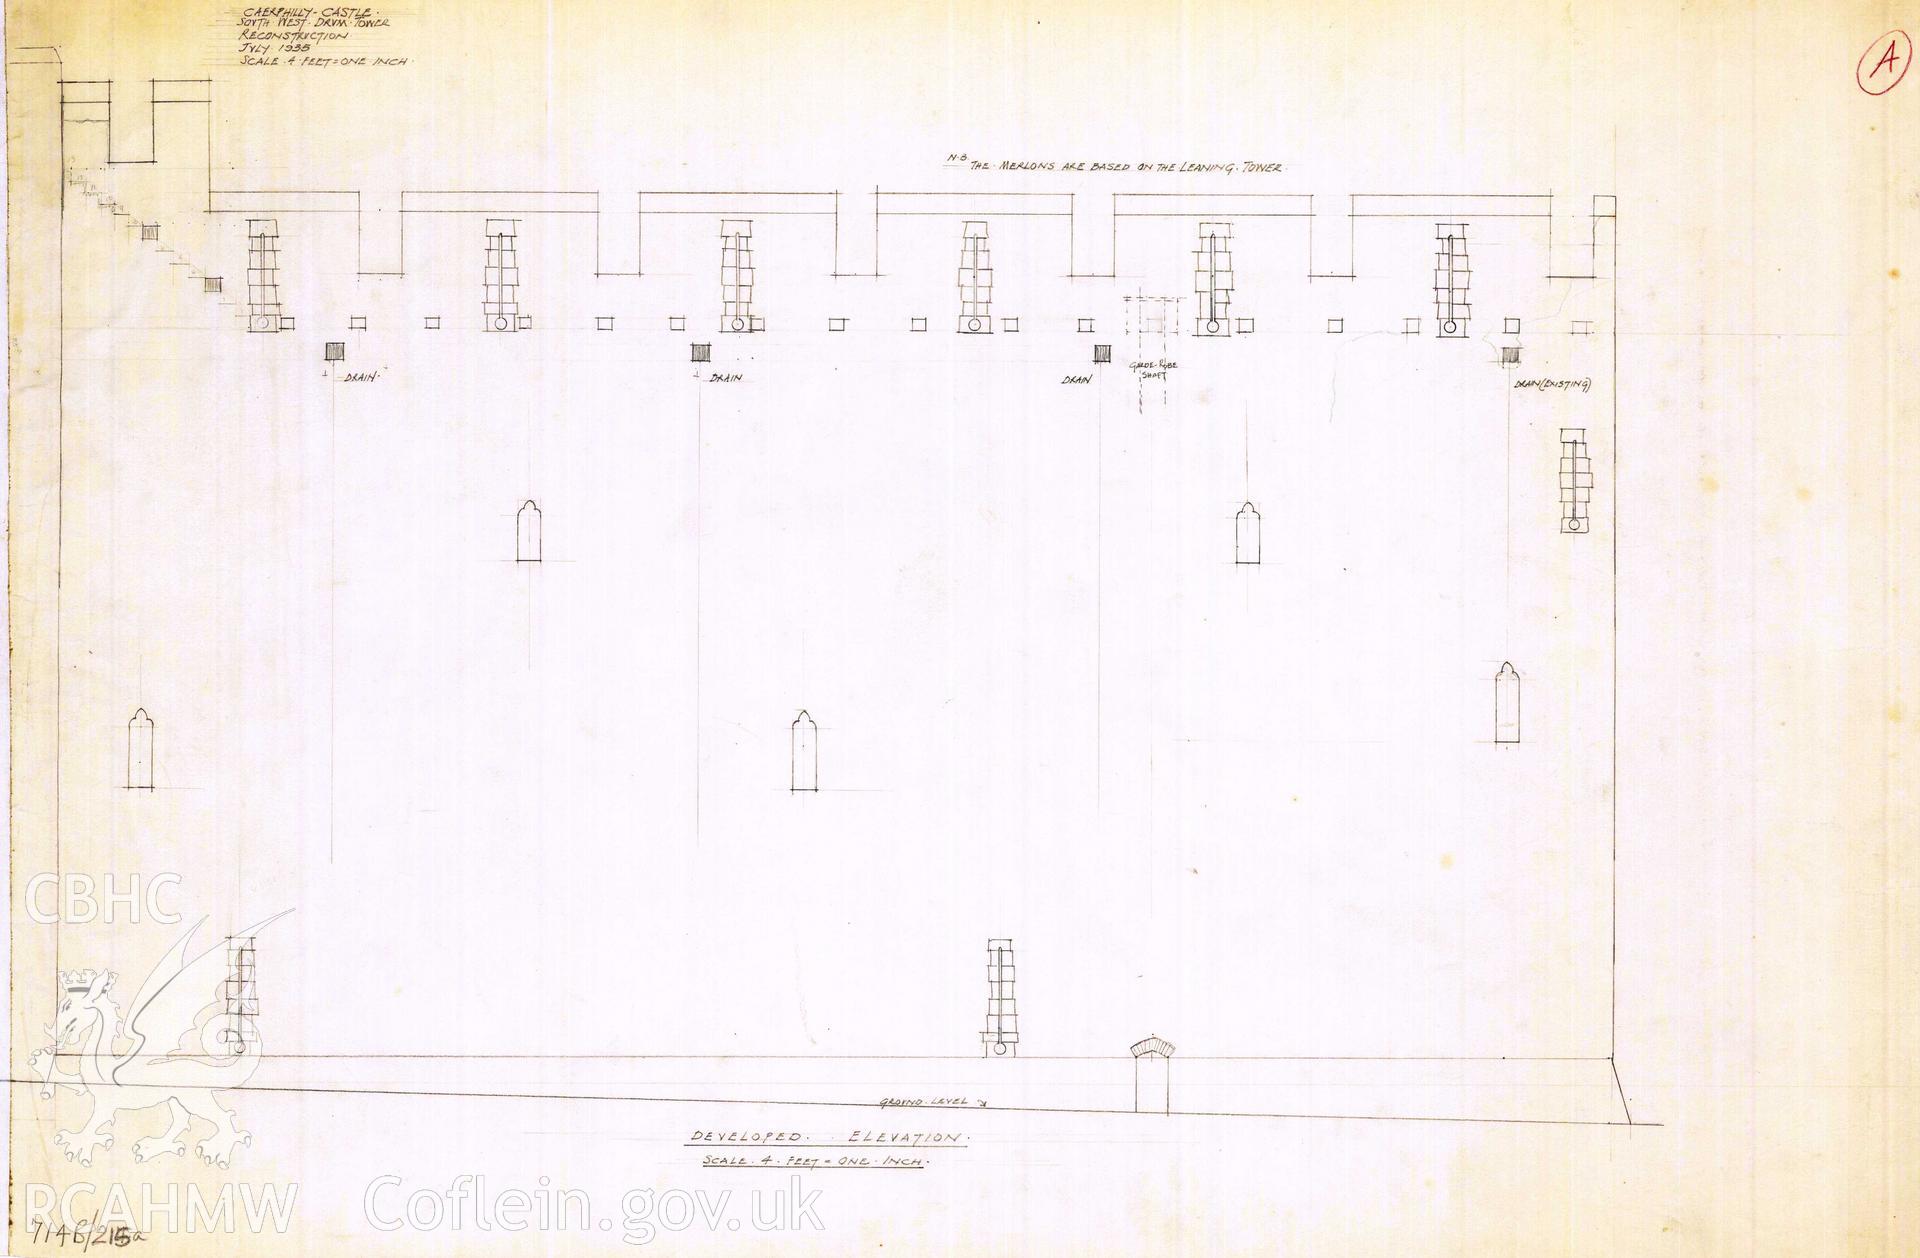 Cadw guardianship monument drawing of Caerphilly Castle. SW tower, elevation unrolled. Cadw Ref. No:714B/215a. Scale 1:48.